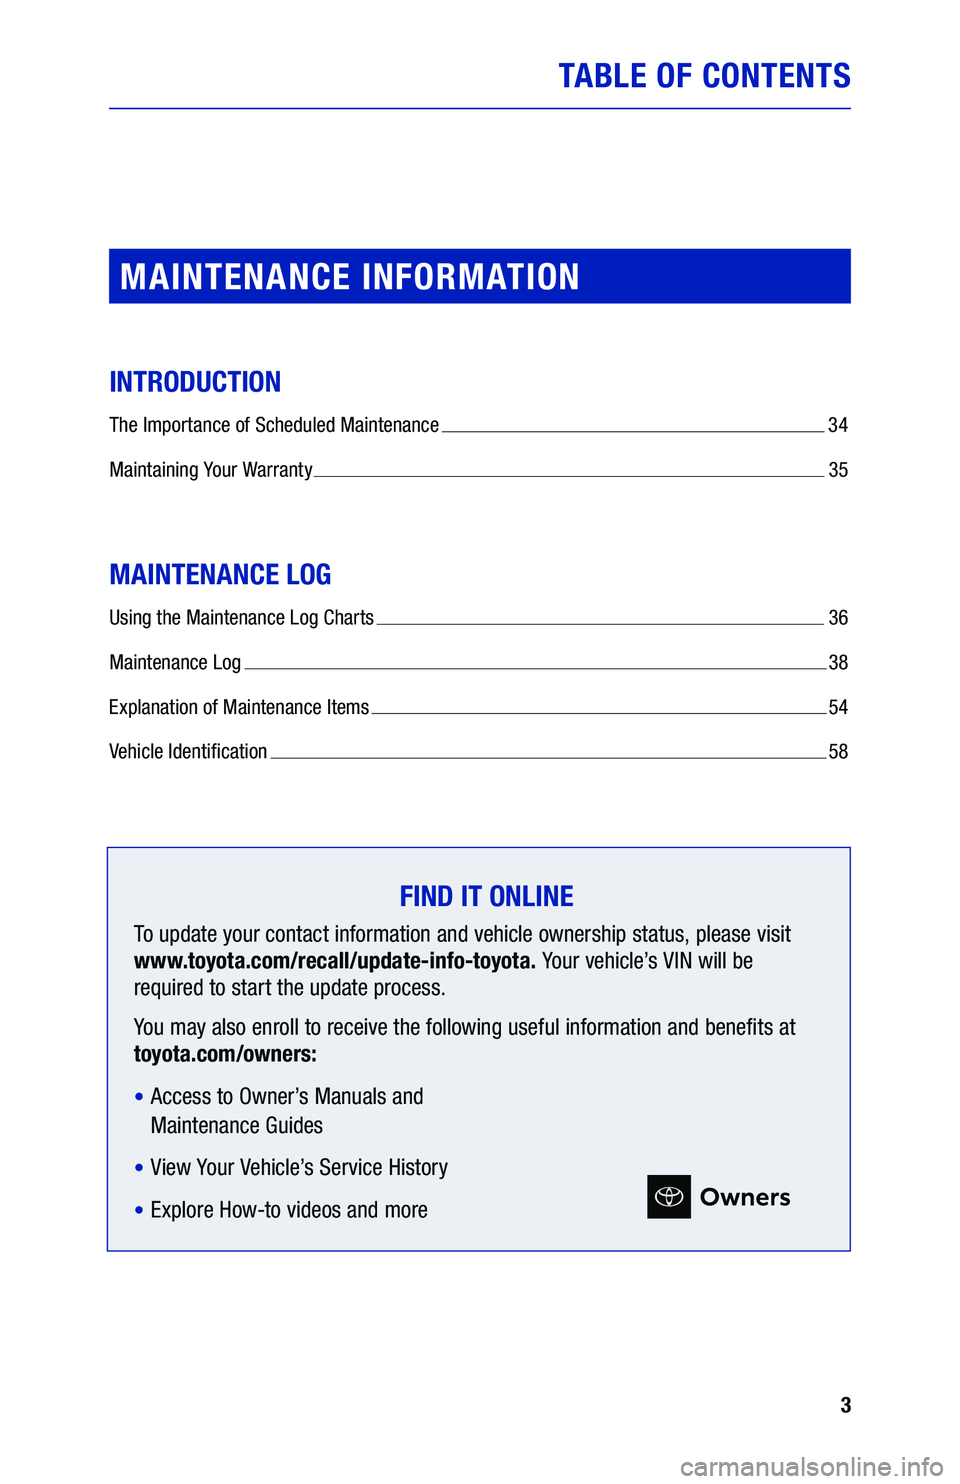 TOYOTA SIENNA HYBRID 2021  Warranties & Maintenance Guides (in English) INTRODUCTION
The Importance of Scheduled Maintenance  34
Maintaining Your Warranty  35
MAINTENANCE LOG
Using the Maintenance Log Charts  36
Maintenance Log  38
Explanation of Maintenance Items  54
Veh